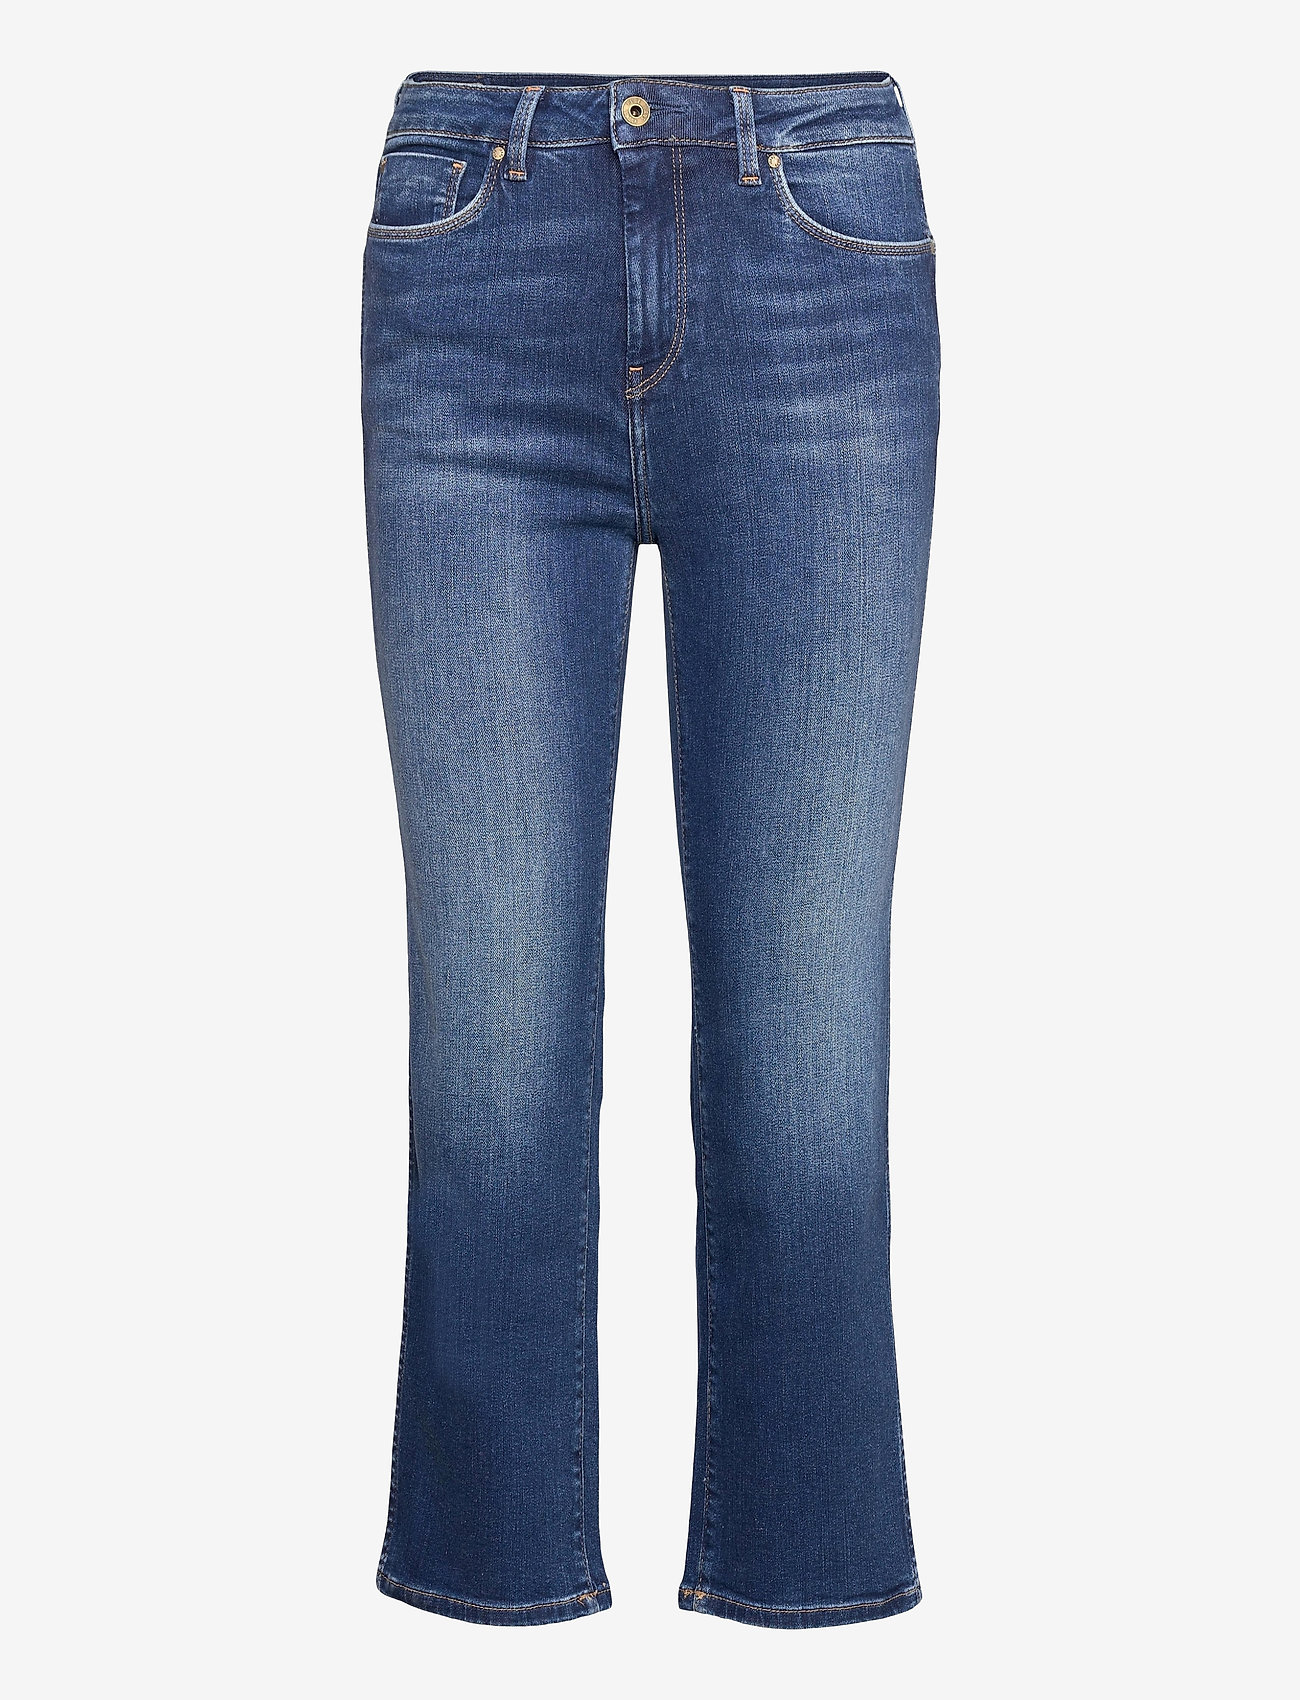 Pepe Jeans London - DION 7/8 - straight jeans - denim - 0